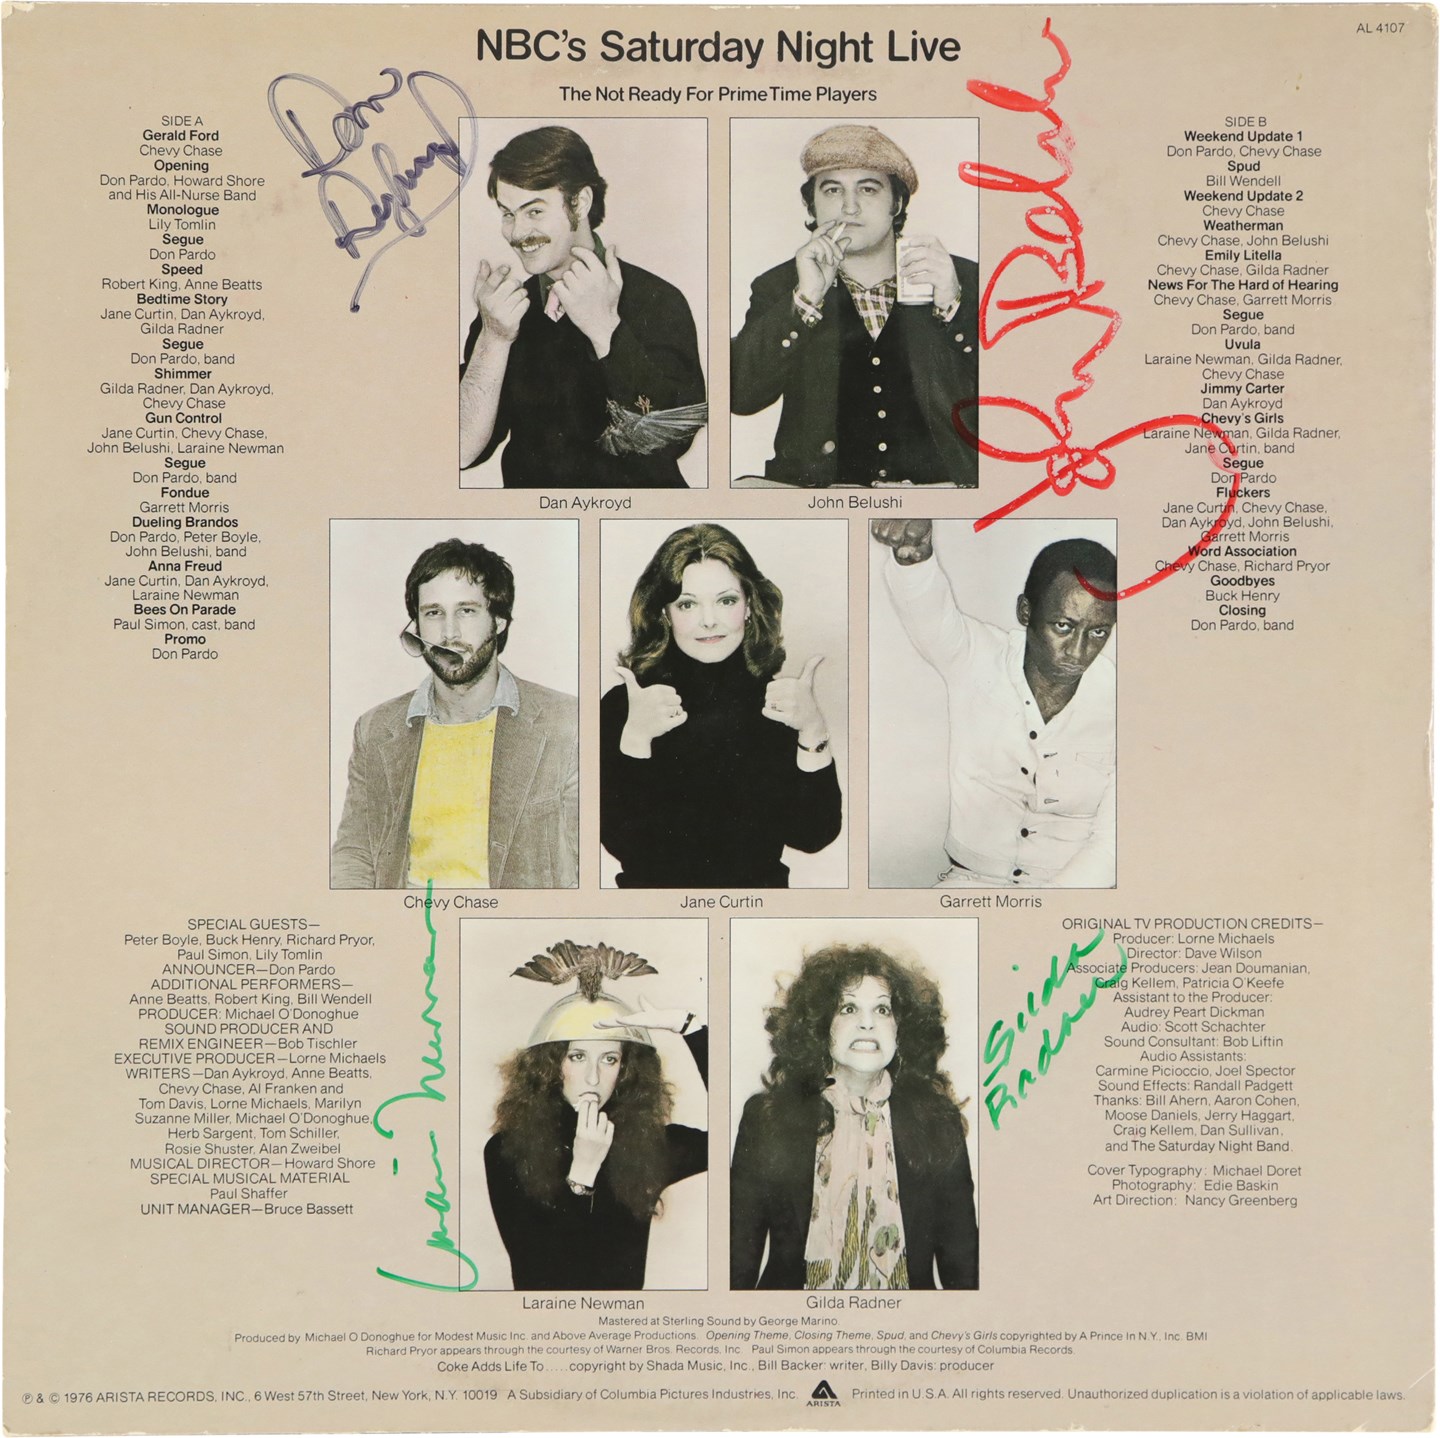 Rock And Pop Culture - 1976 "Saturday Night Live" LP Album Signed by the Cast Including John Belushi (JSA)